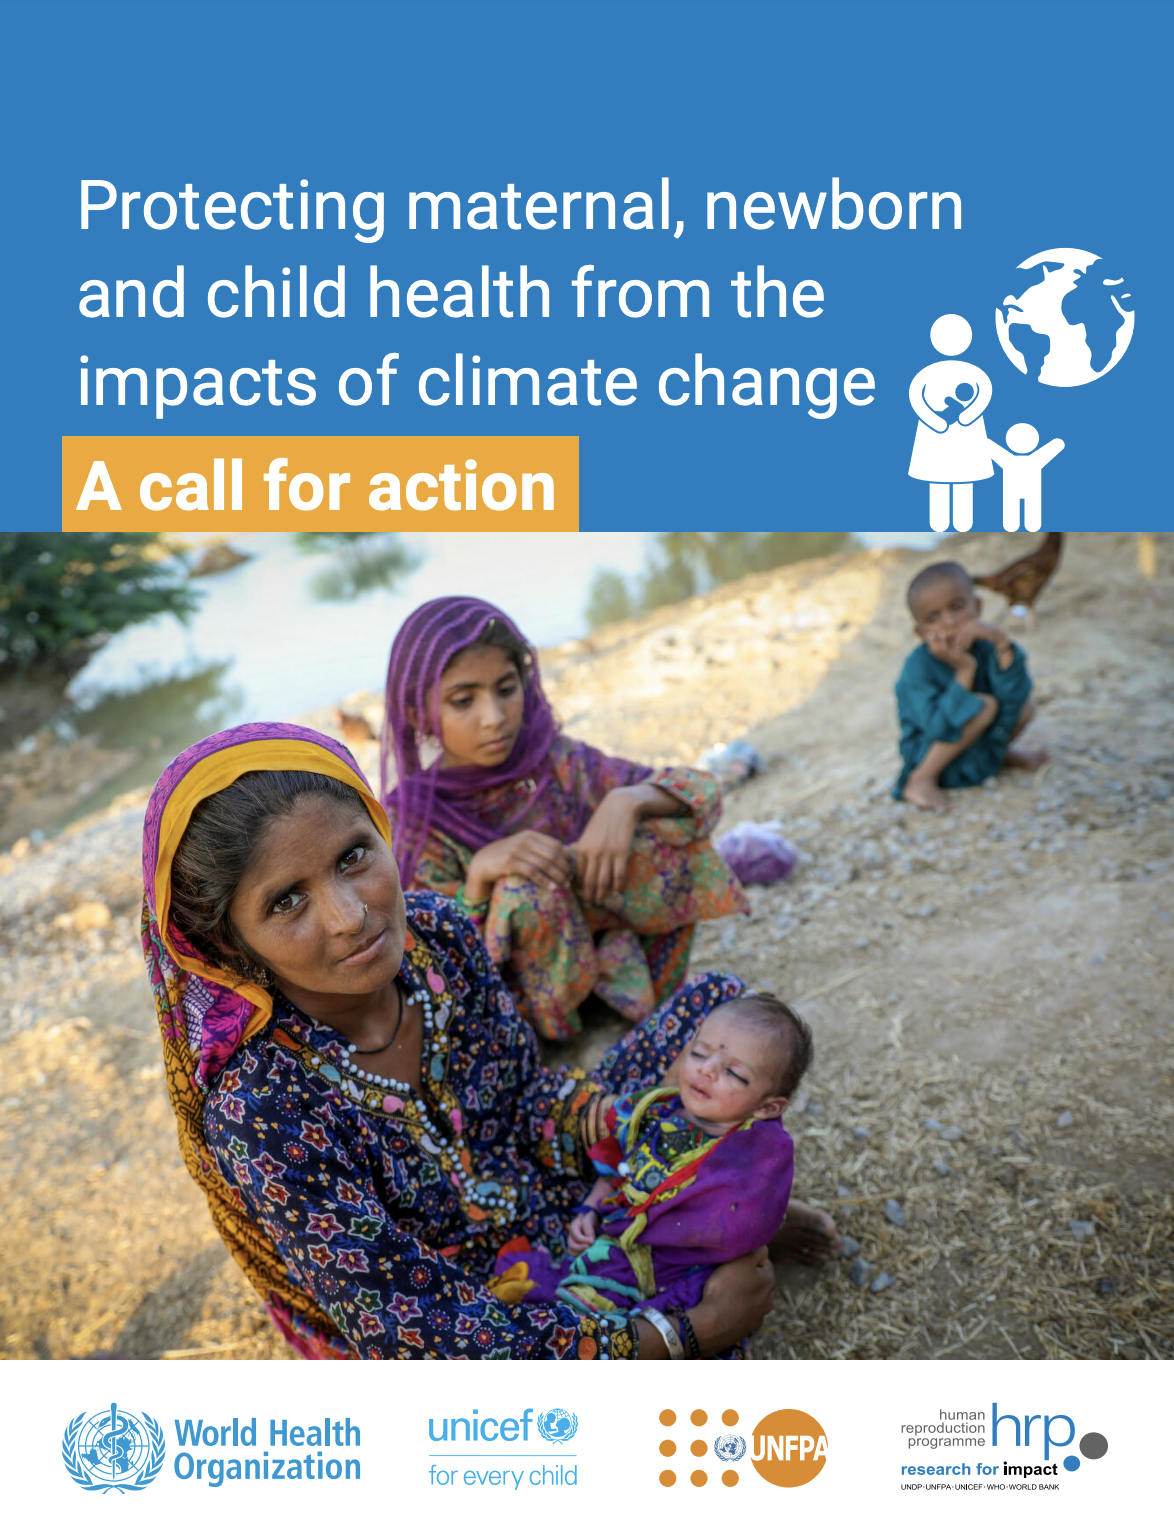 Protecting maternal, newborn and child health from the impacts of climate change: call for action